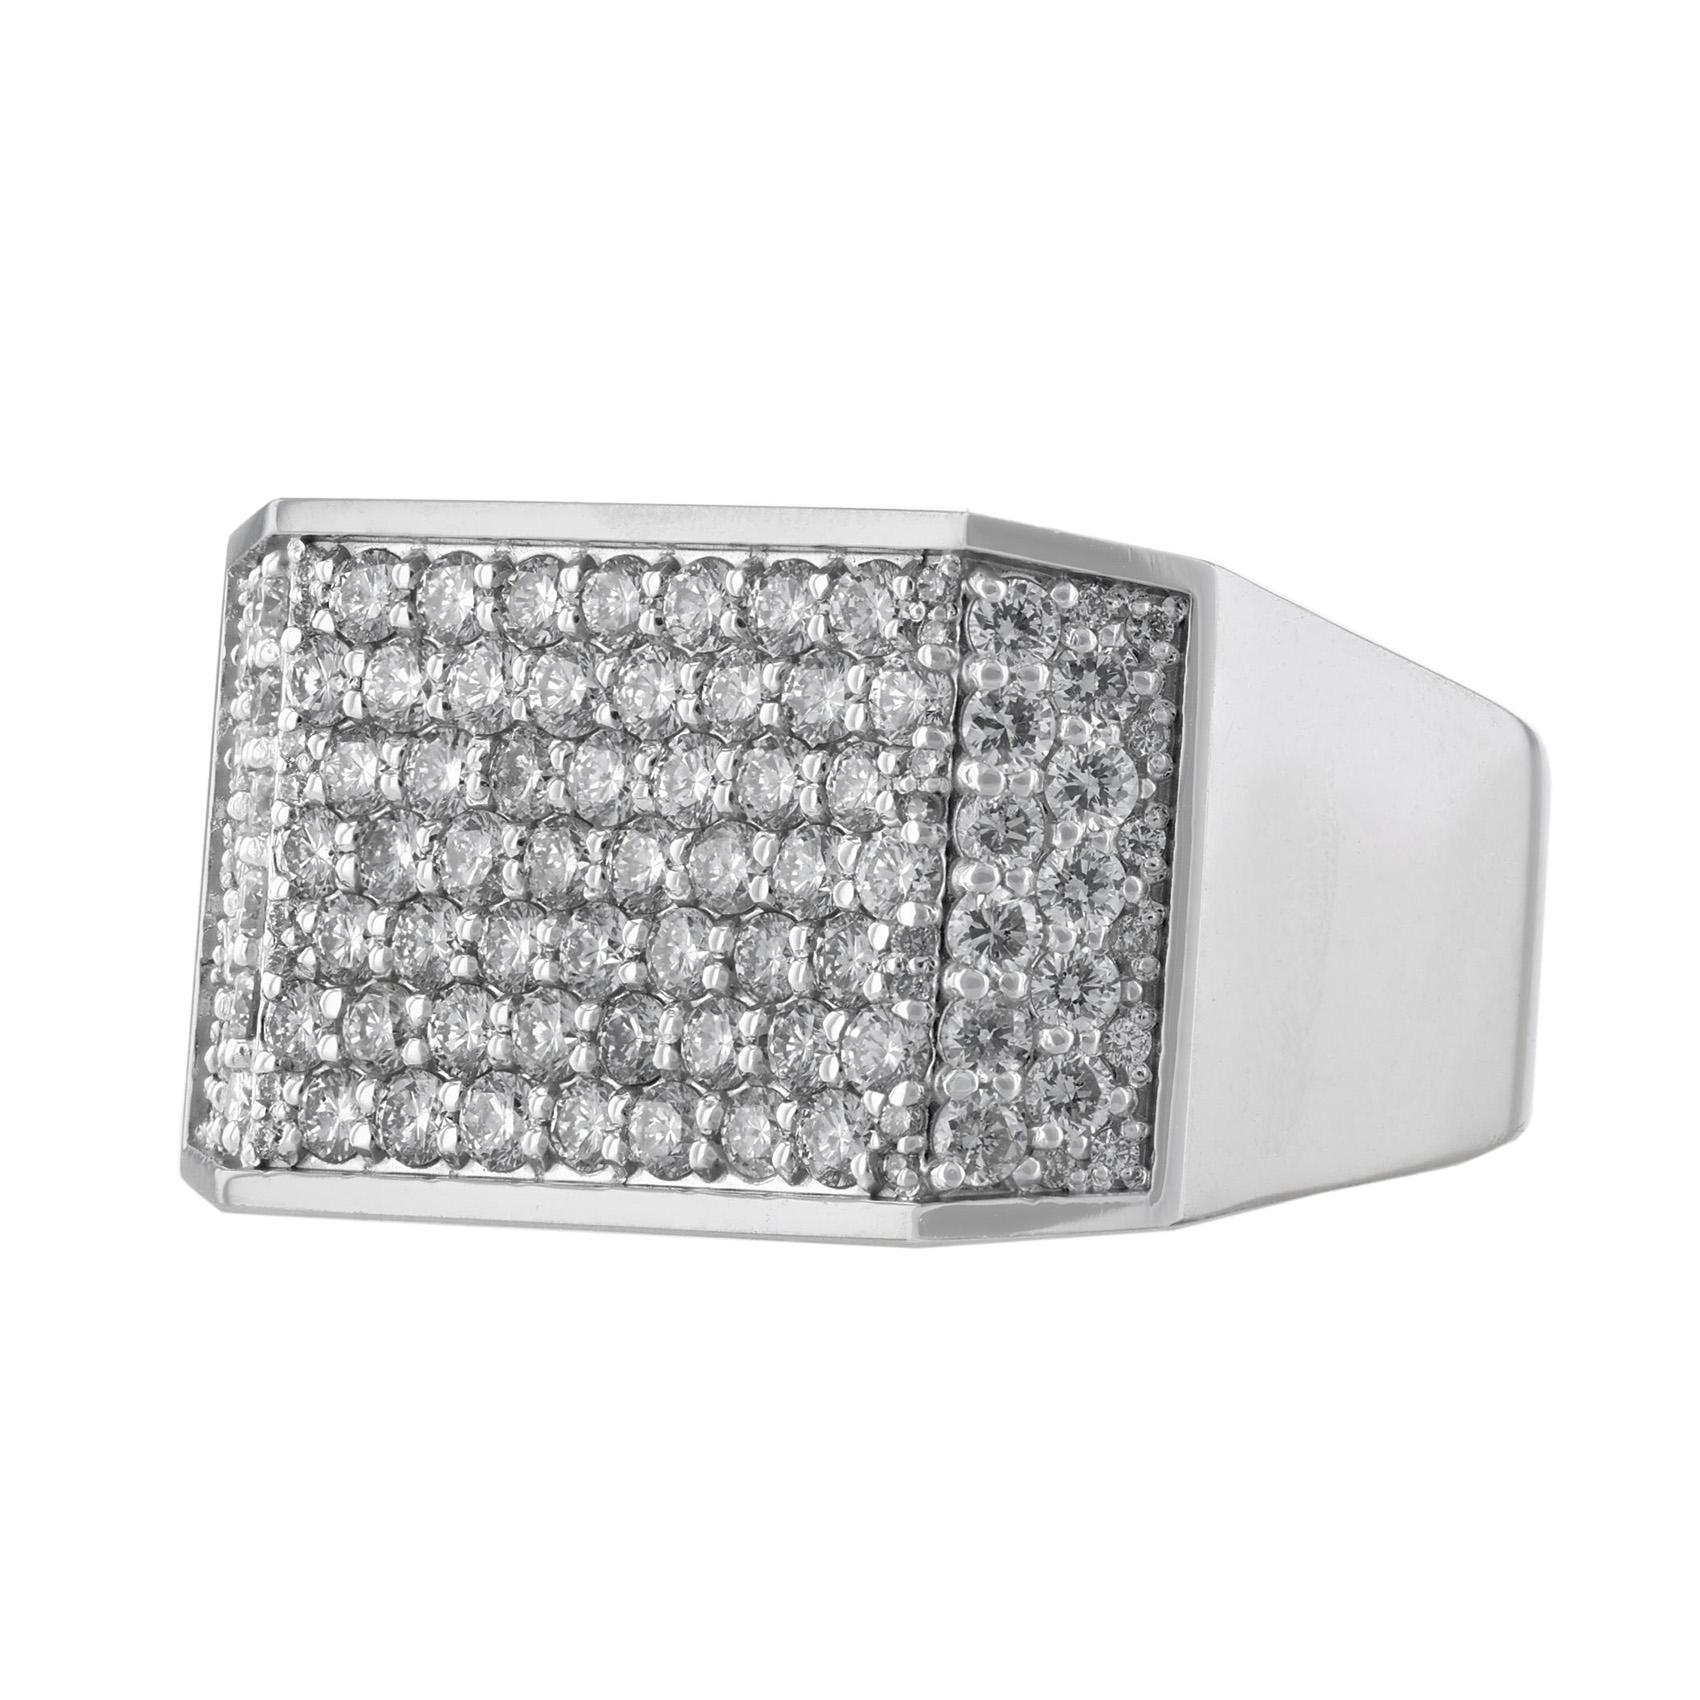 This men’s ring is 14K white gold and features 160 round cut diamonds. All stones are pave set and weigh 1.90 carats combined. The ring has a color grade of (G) and a clarity grade of (VS2).